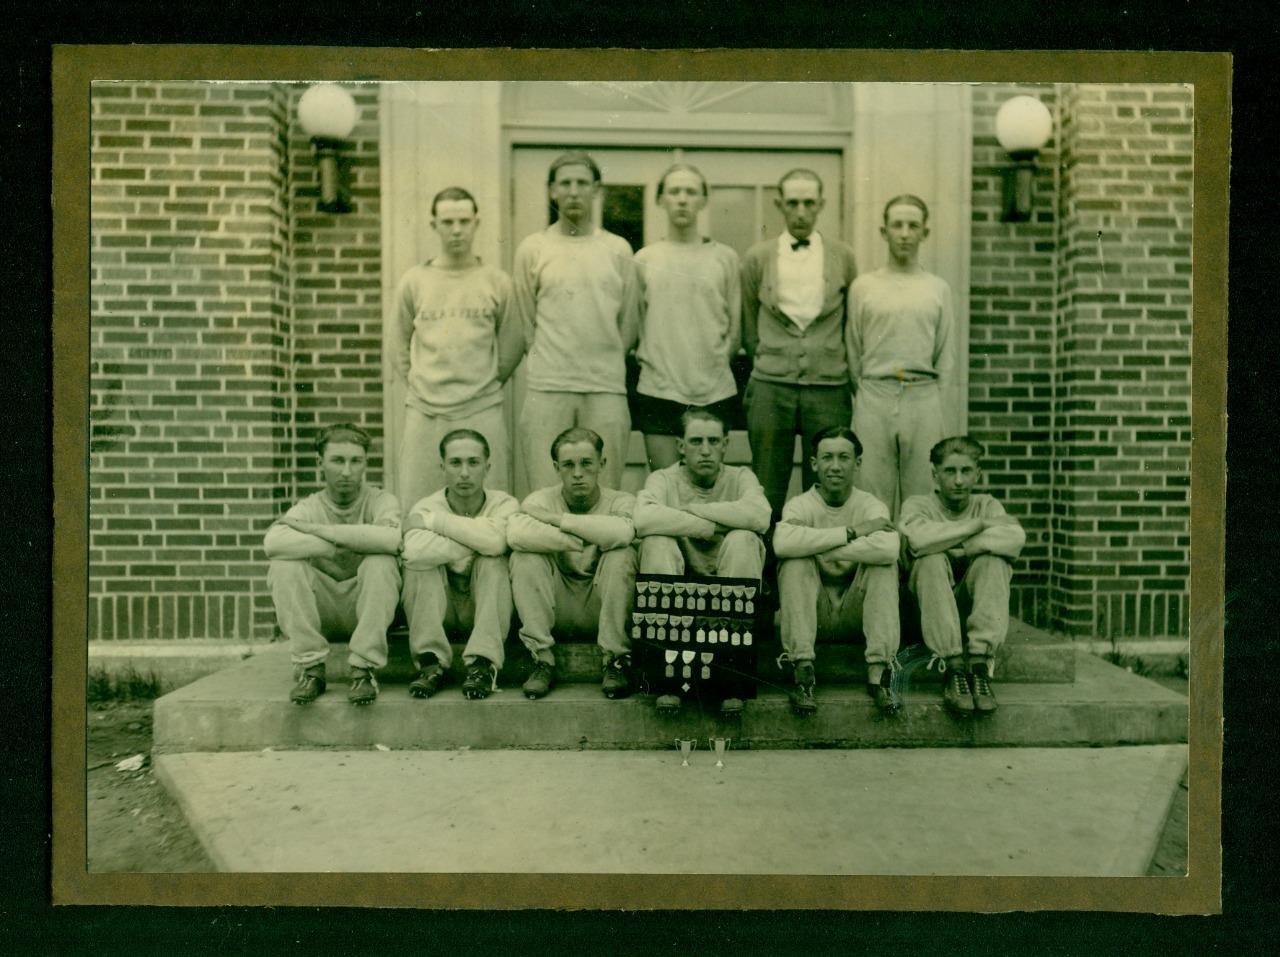 S15, 516-08, 1920s, Mtd. Photo, HS Sports Team w/Medals & Trophy, Clearfield, IA